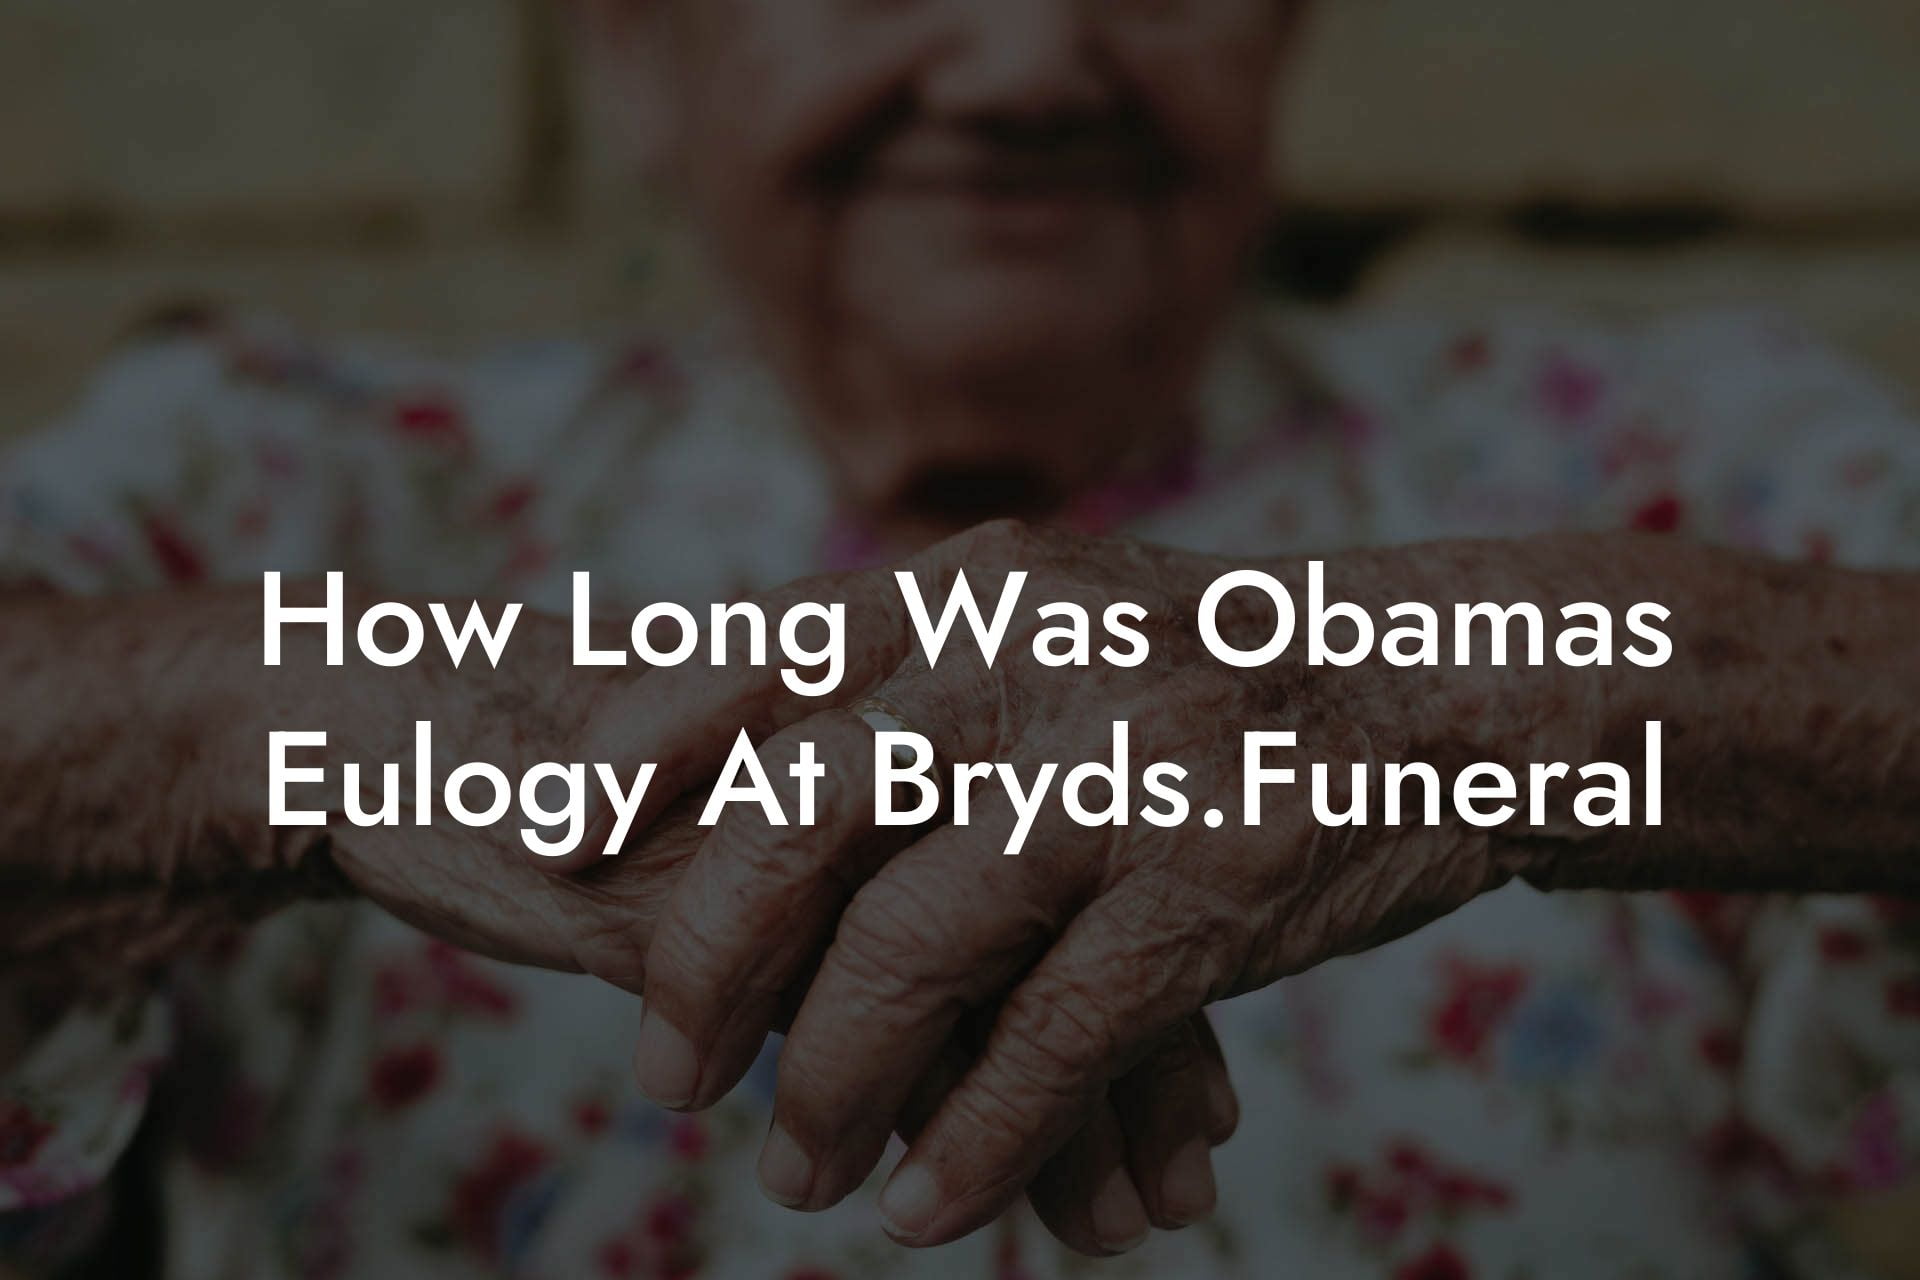 How Long Was Obamas Eulogy At Bryds.Funeral